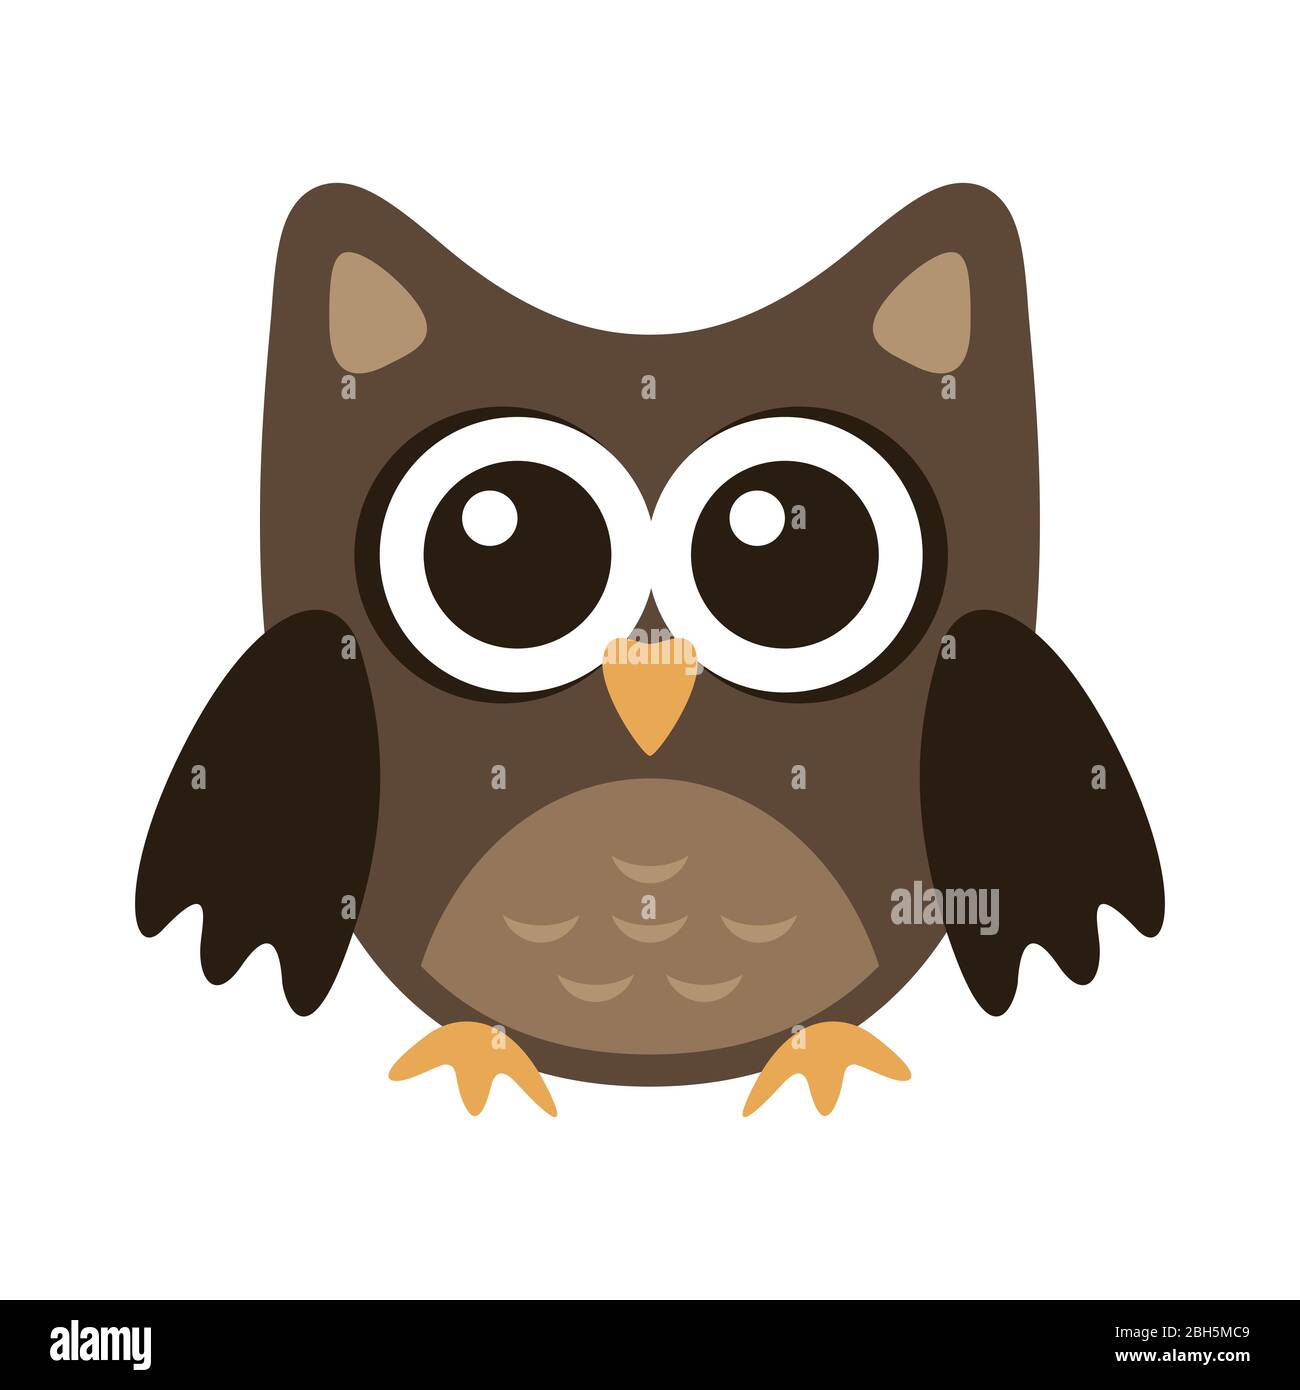 Owl funny stylized icon symbol brown colors Stock Vector